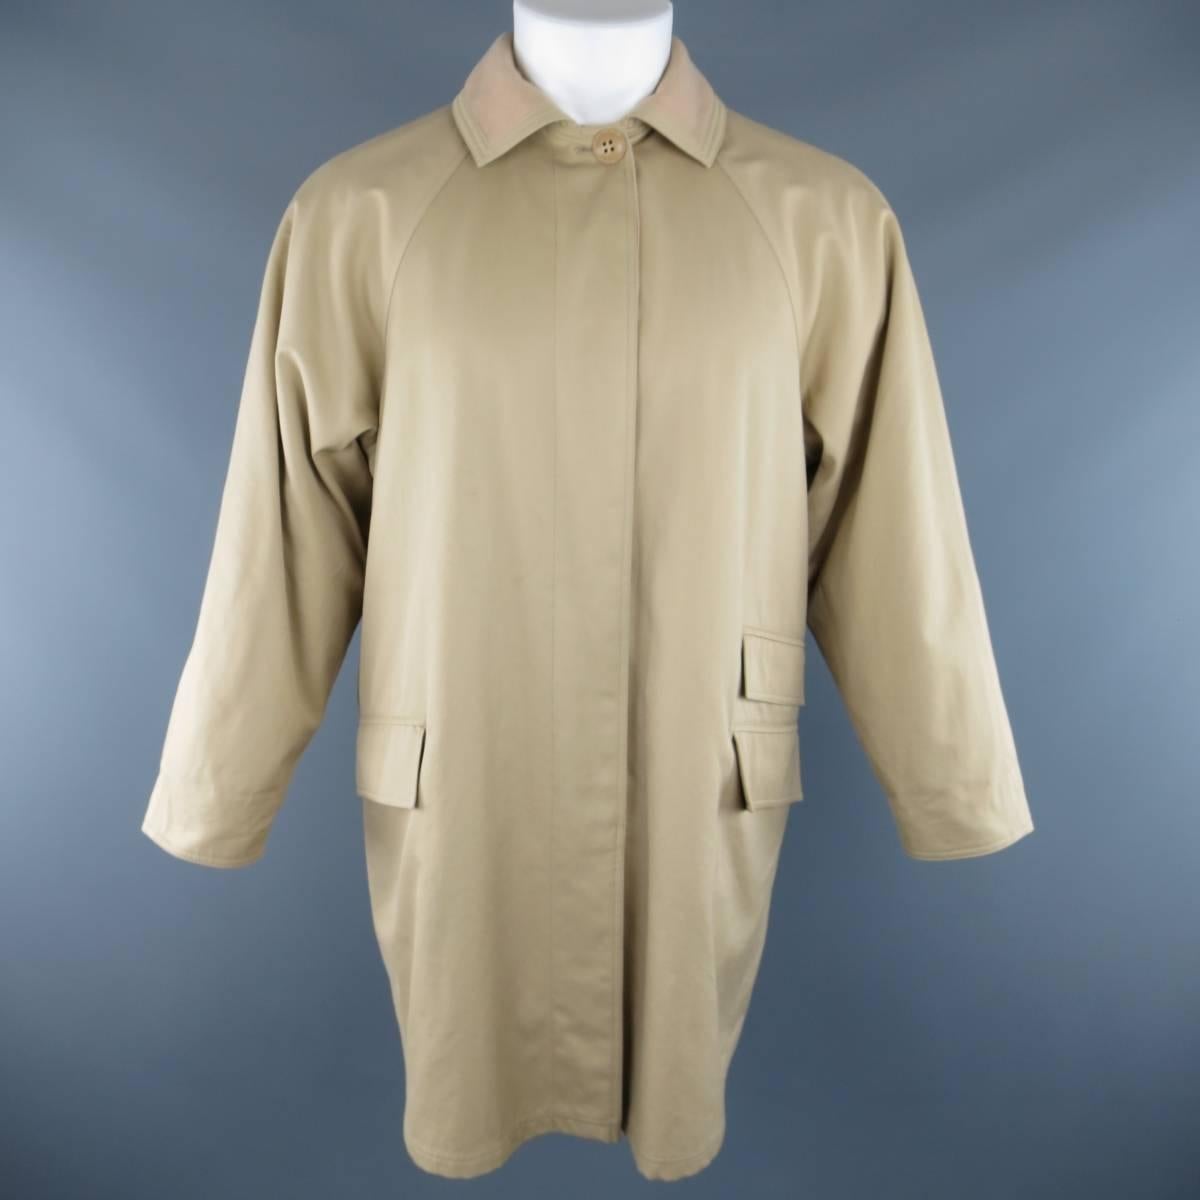 Vintage 1990s GIANNI VERSACE coat comes in classic khaki beige twill and features a hidden placket button up closure, raglan sleeves, triple flap pockets, and beige fleece lining and collar. Discoloration at chest shown in detail short. As-Is. Belt